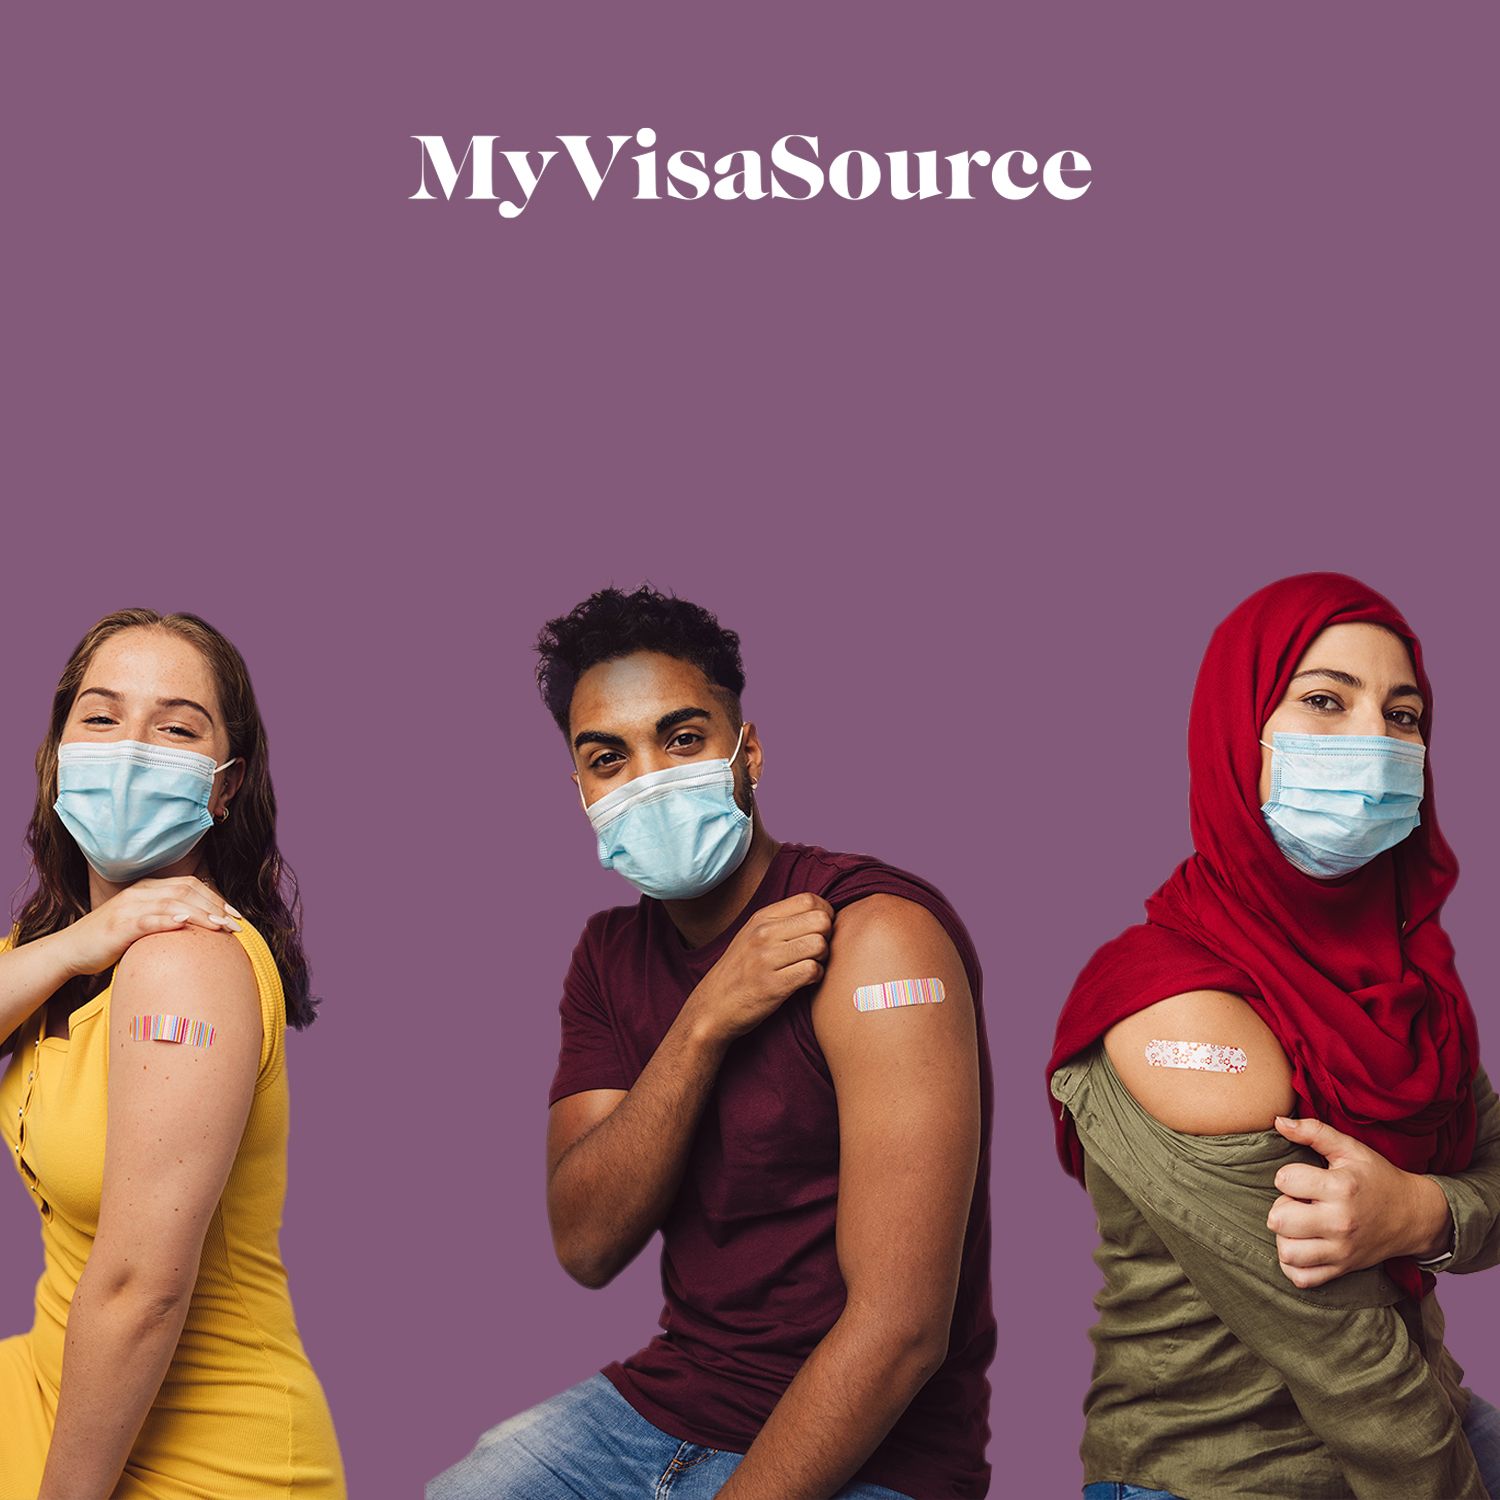 three people with covid masks and vaccination bandages my visa source